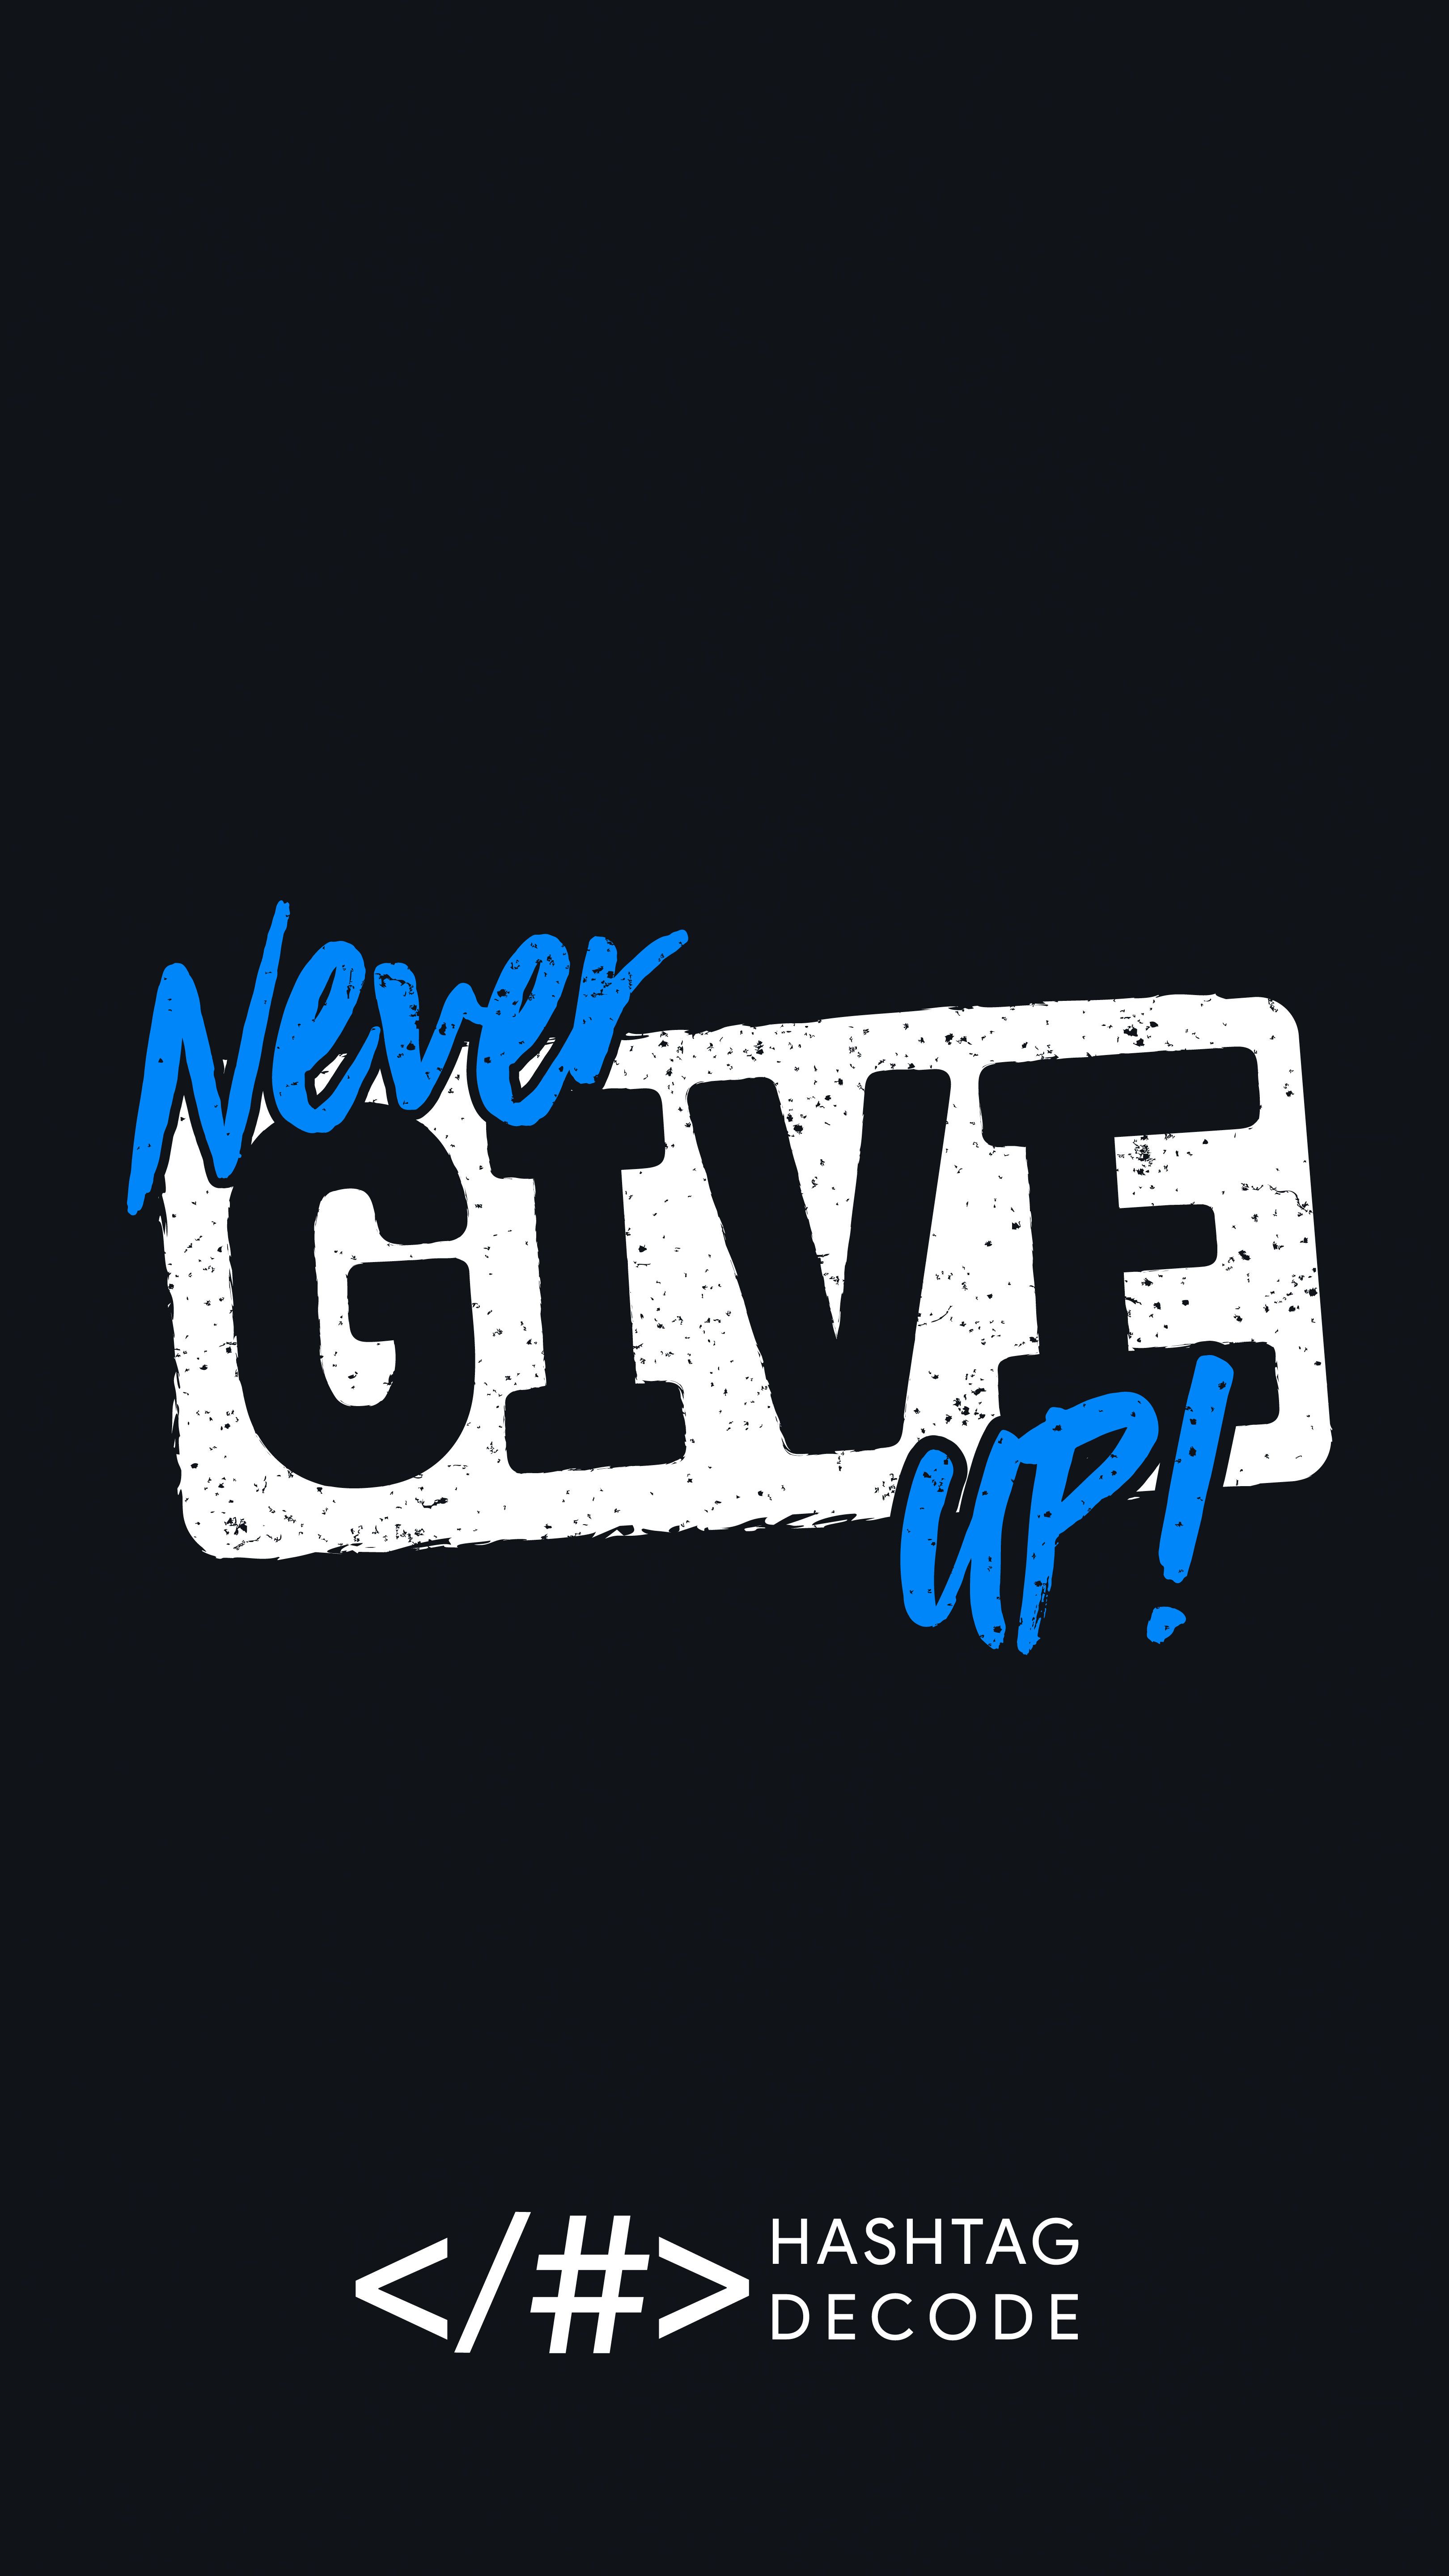 NeverGiveUp on what you really want to do. Never give up because winners never quit, and quitters never win! #N. App development, Data science, Digital marketing